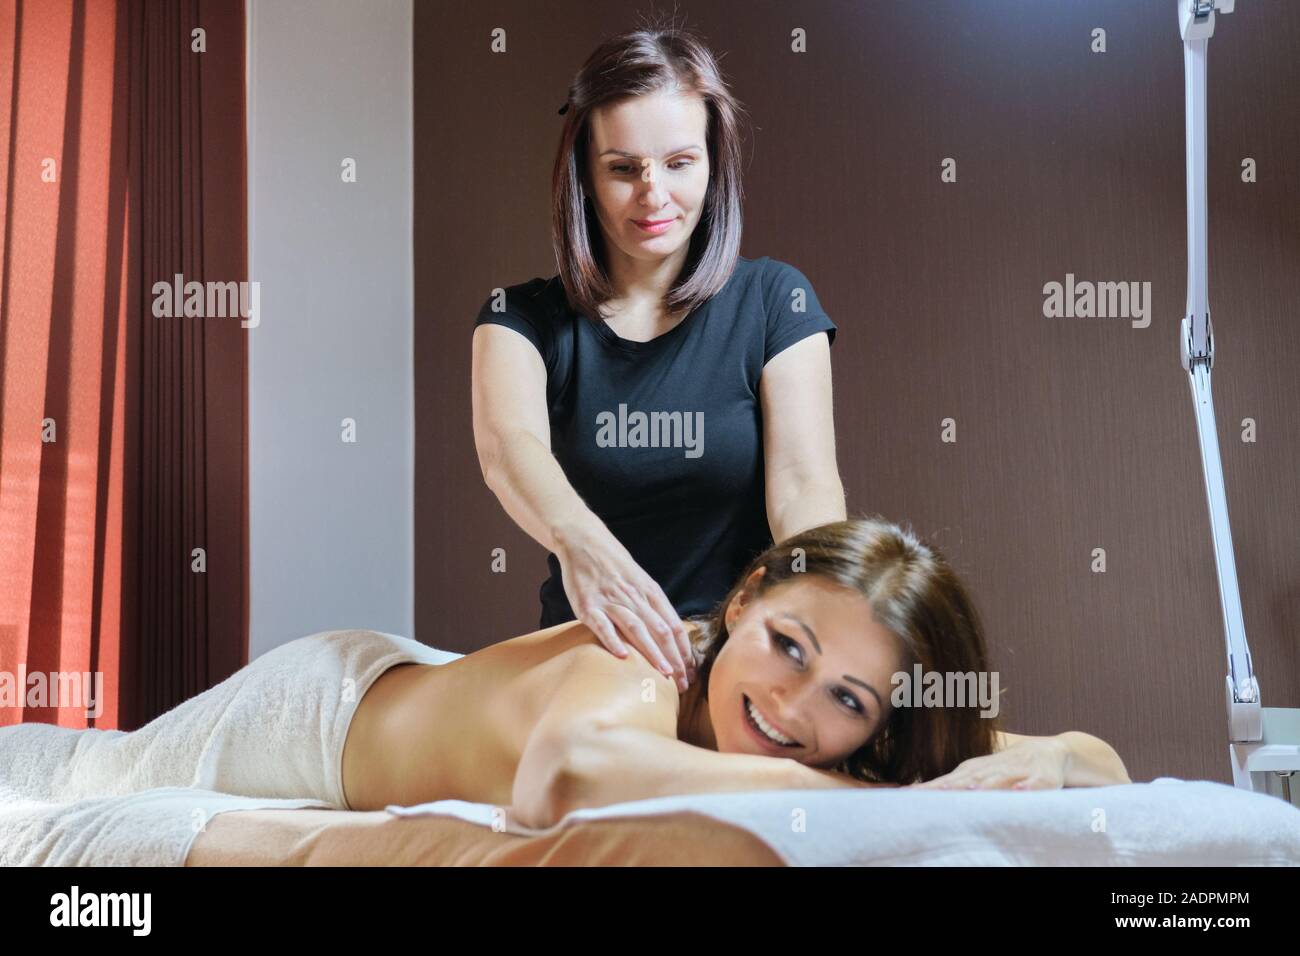 Mature woman lying on massage table and receiving medical back massage Stock Photo